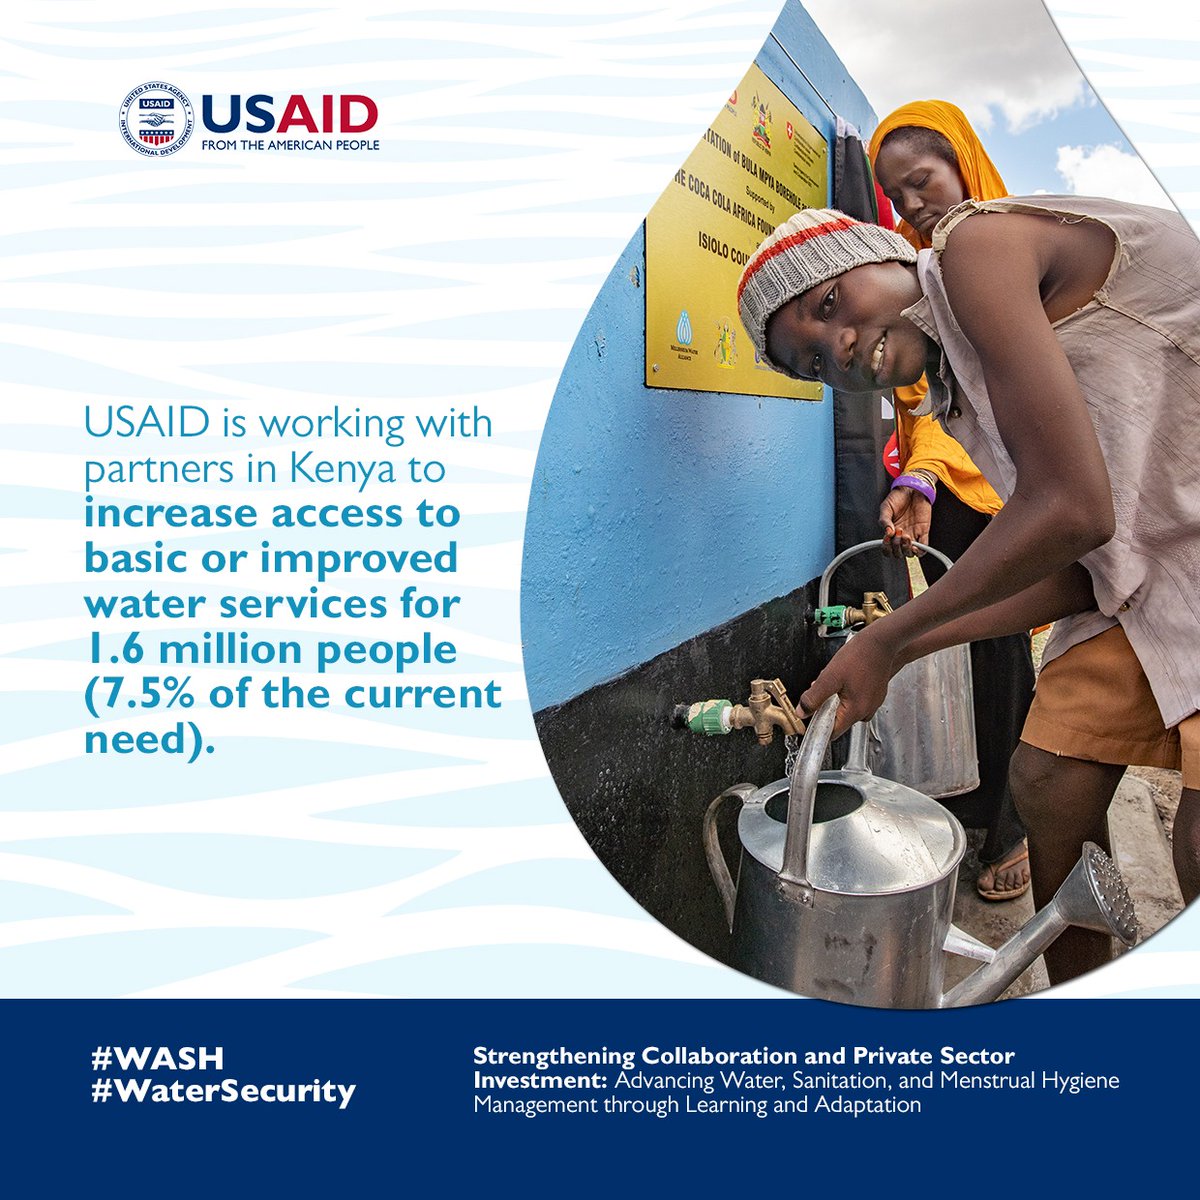 Ensuring water quality among small, local providers is critical for public health. @USAIDKenya is collaborating with Nairobi Water and Nairobi City County to enhance water quality standards and improve service delivery. #WaterSecurity